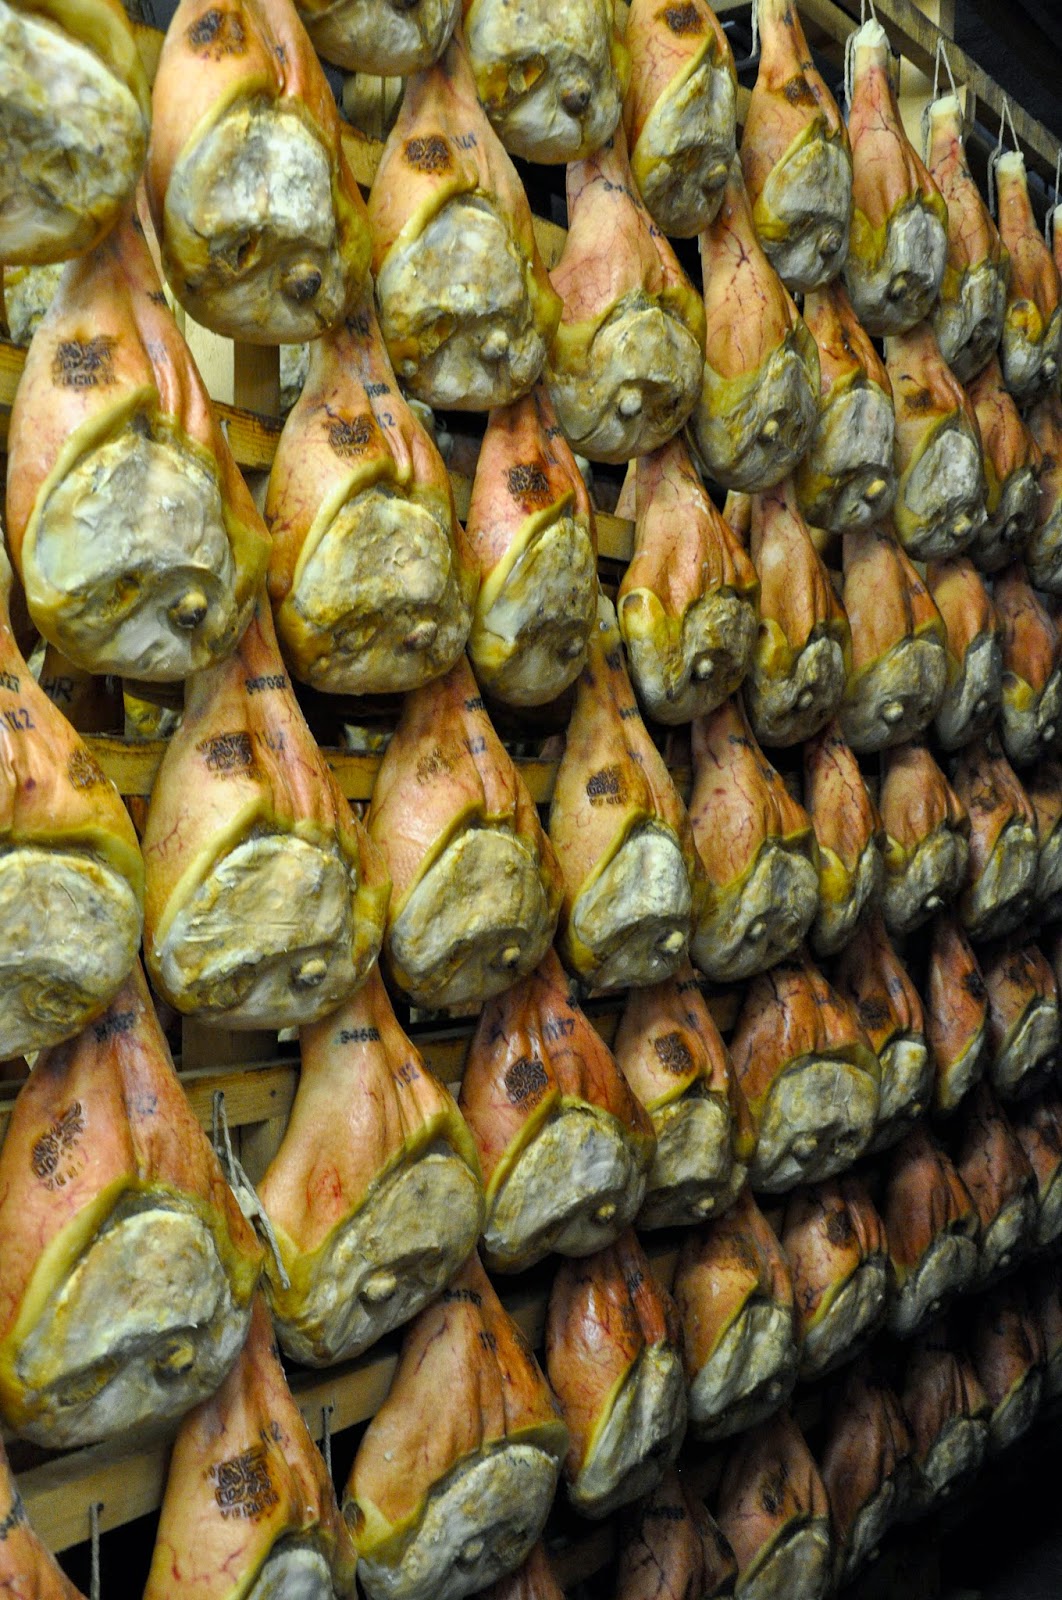 Prosciutto being dry cured